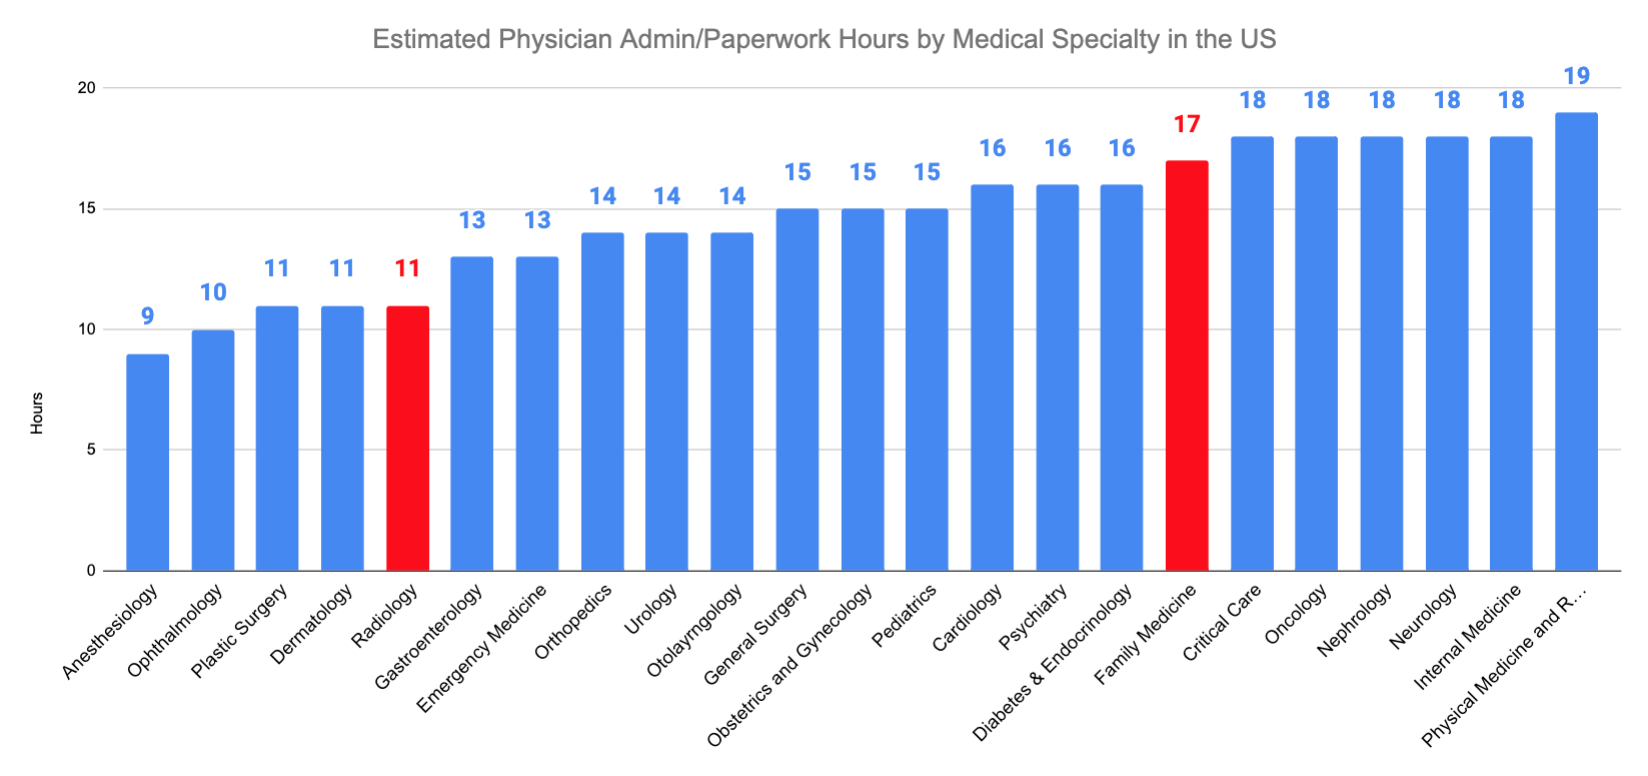 Radiology vs. Family Medicine Estimated Physician Admin/Paperwork Hours by Medical Specialty in the US